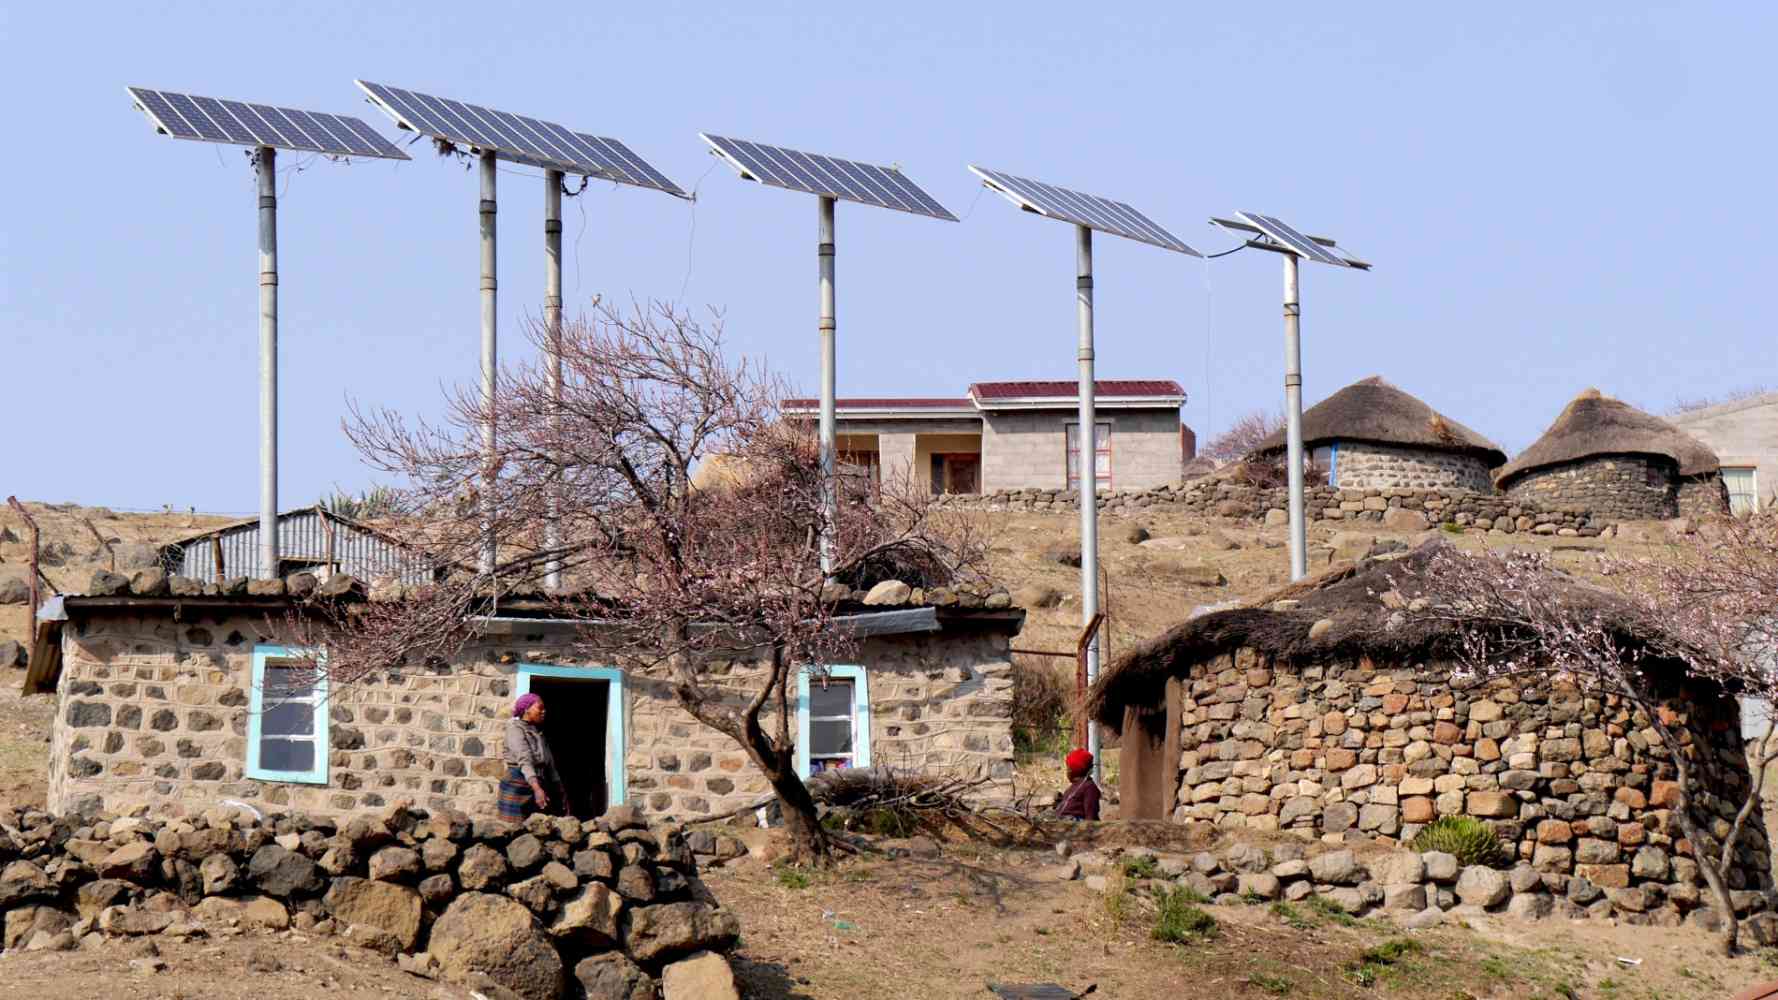 We created the first AI-powered solar electricity backup system for houses in sub-Saharan Africa - https://theconversation.com/we-created-the-first-ai-powered-solar-electricity-backup-system-for-houses-in-sub-saharan-africa-175393